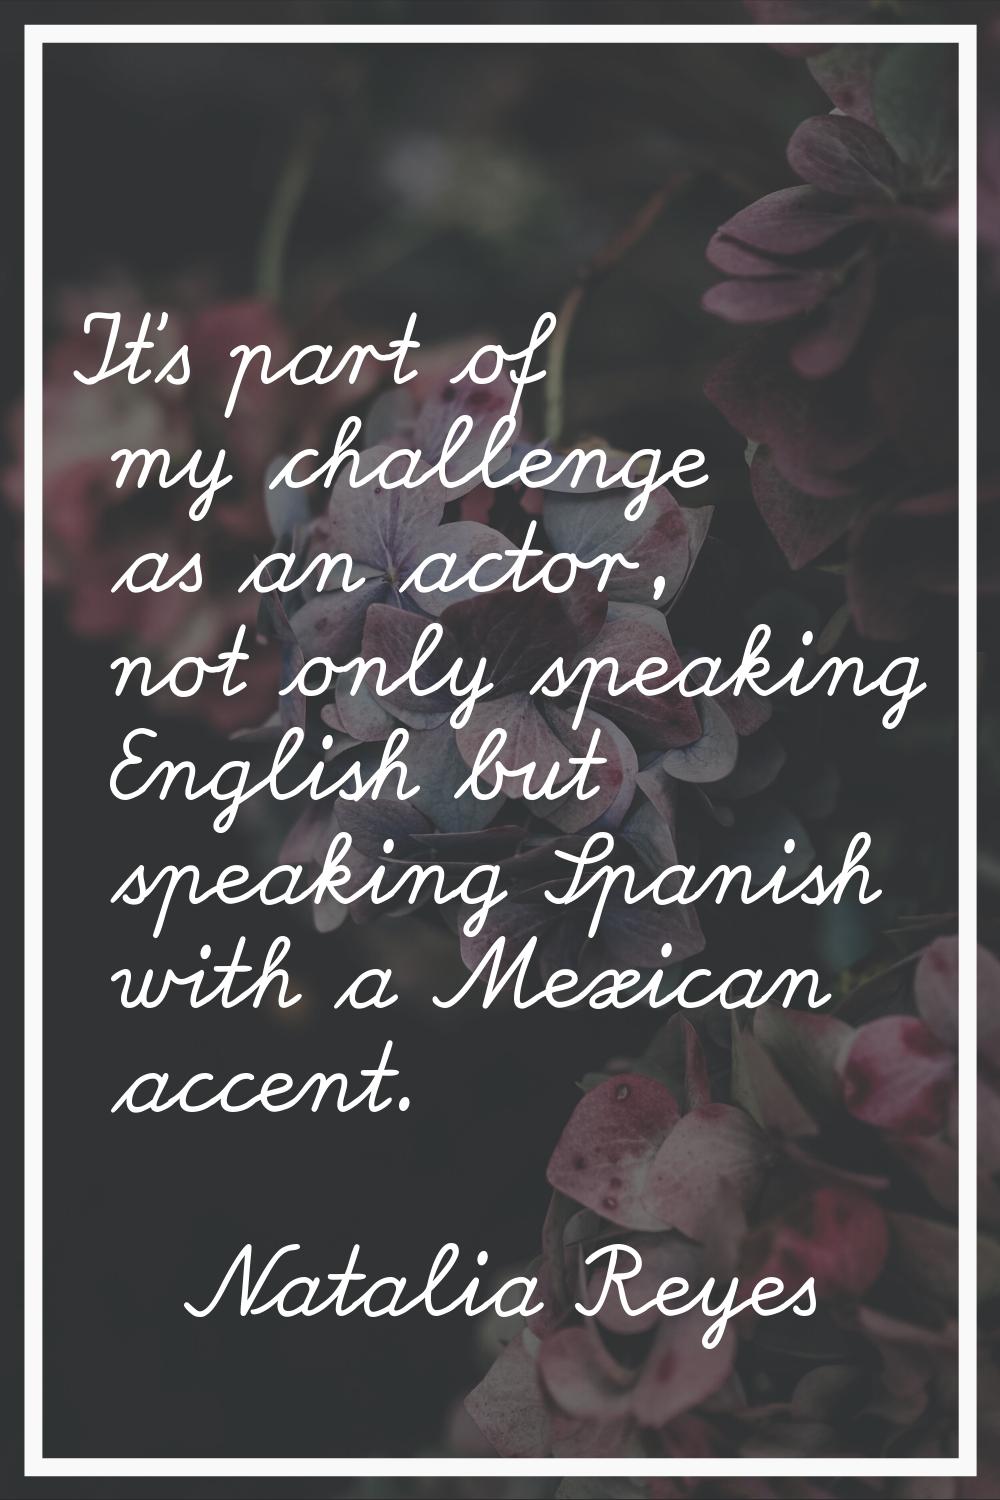 It’s part of my challenge as an actor, not only speaking English but speaking Spanish with a Mexica